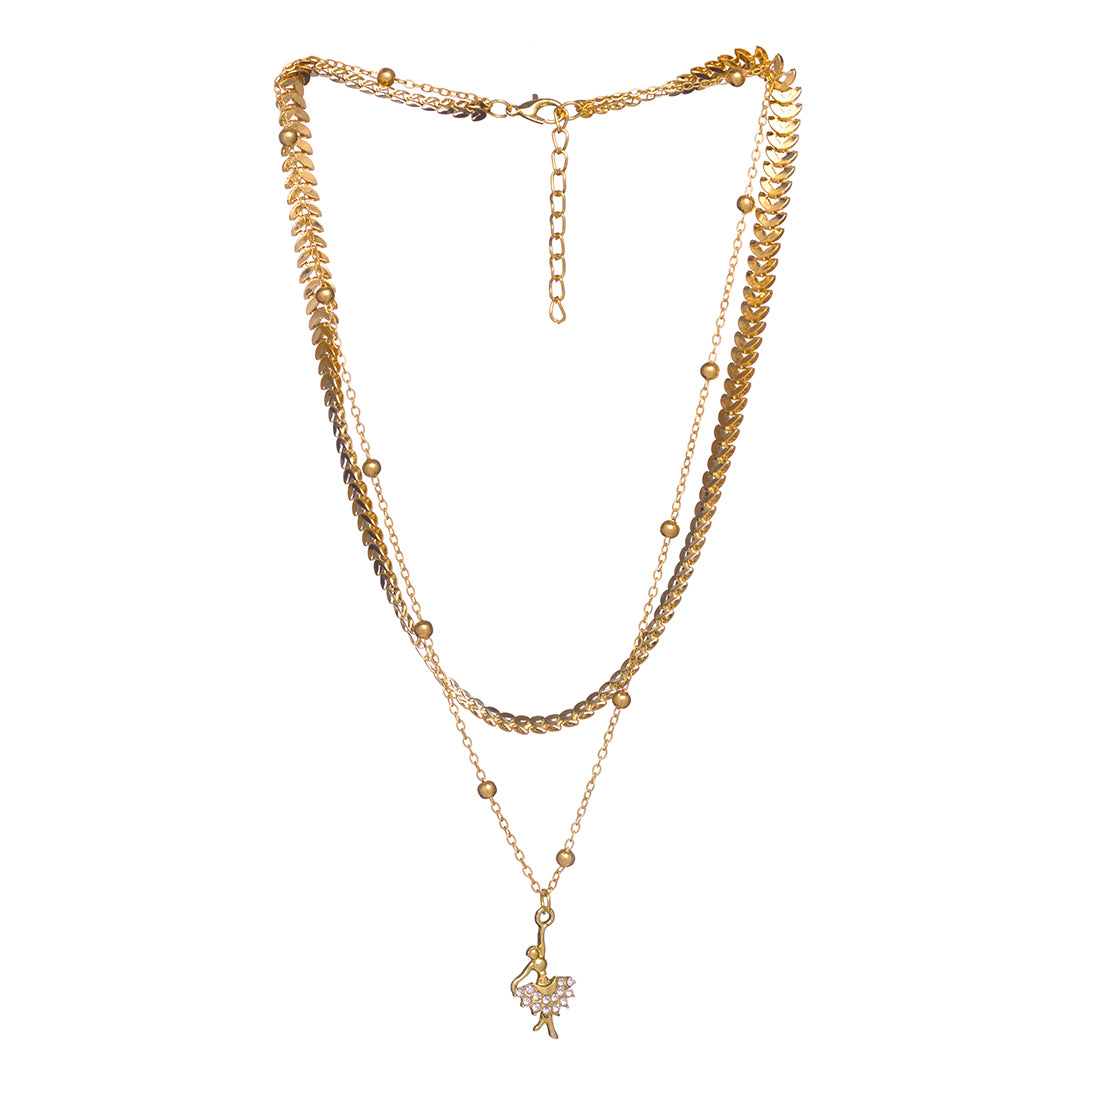 Two-Layered Gold Necklace With Ballerina Pendant And Diamonti